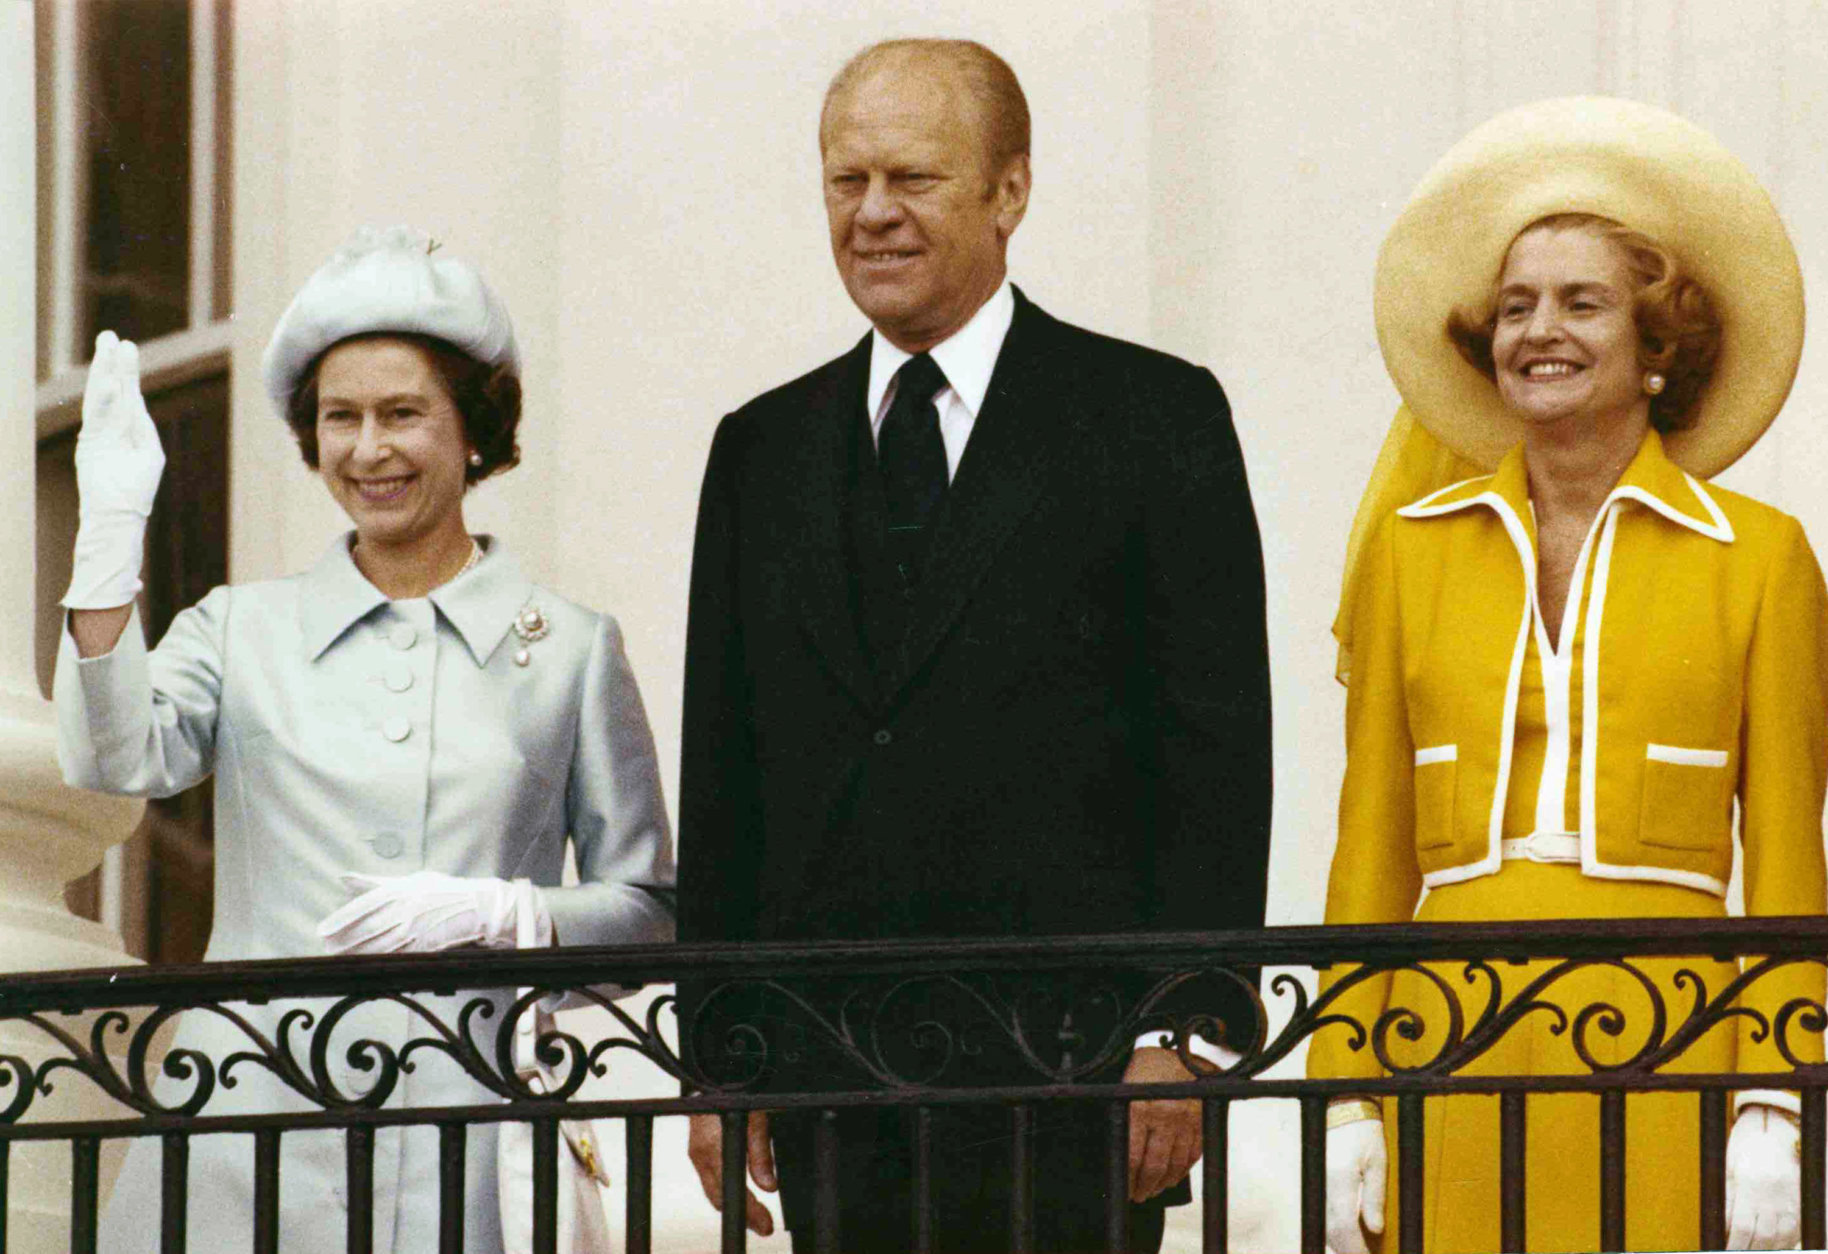 Britain's Queen Elizabeth II, left, waves from the balcony of the White House, in Washington, on July 7, 1976, as she stands with Preisdent Gerald Ford and his wife Betty. (AP Photo/Staff/Green)